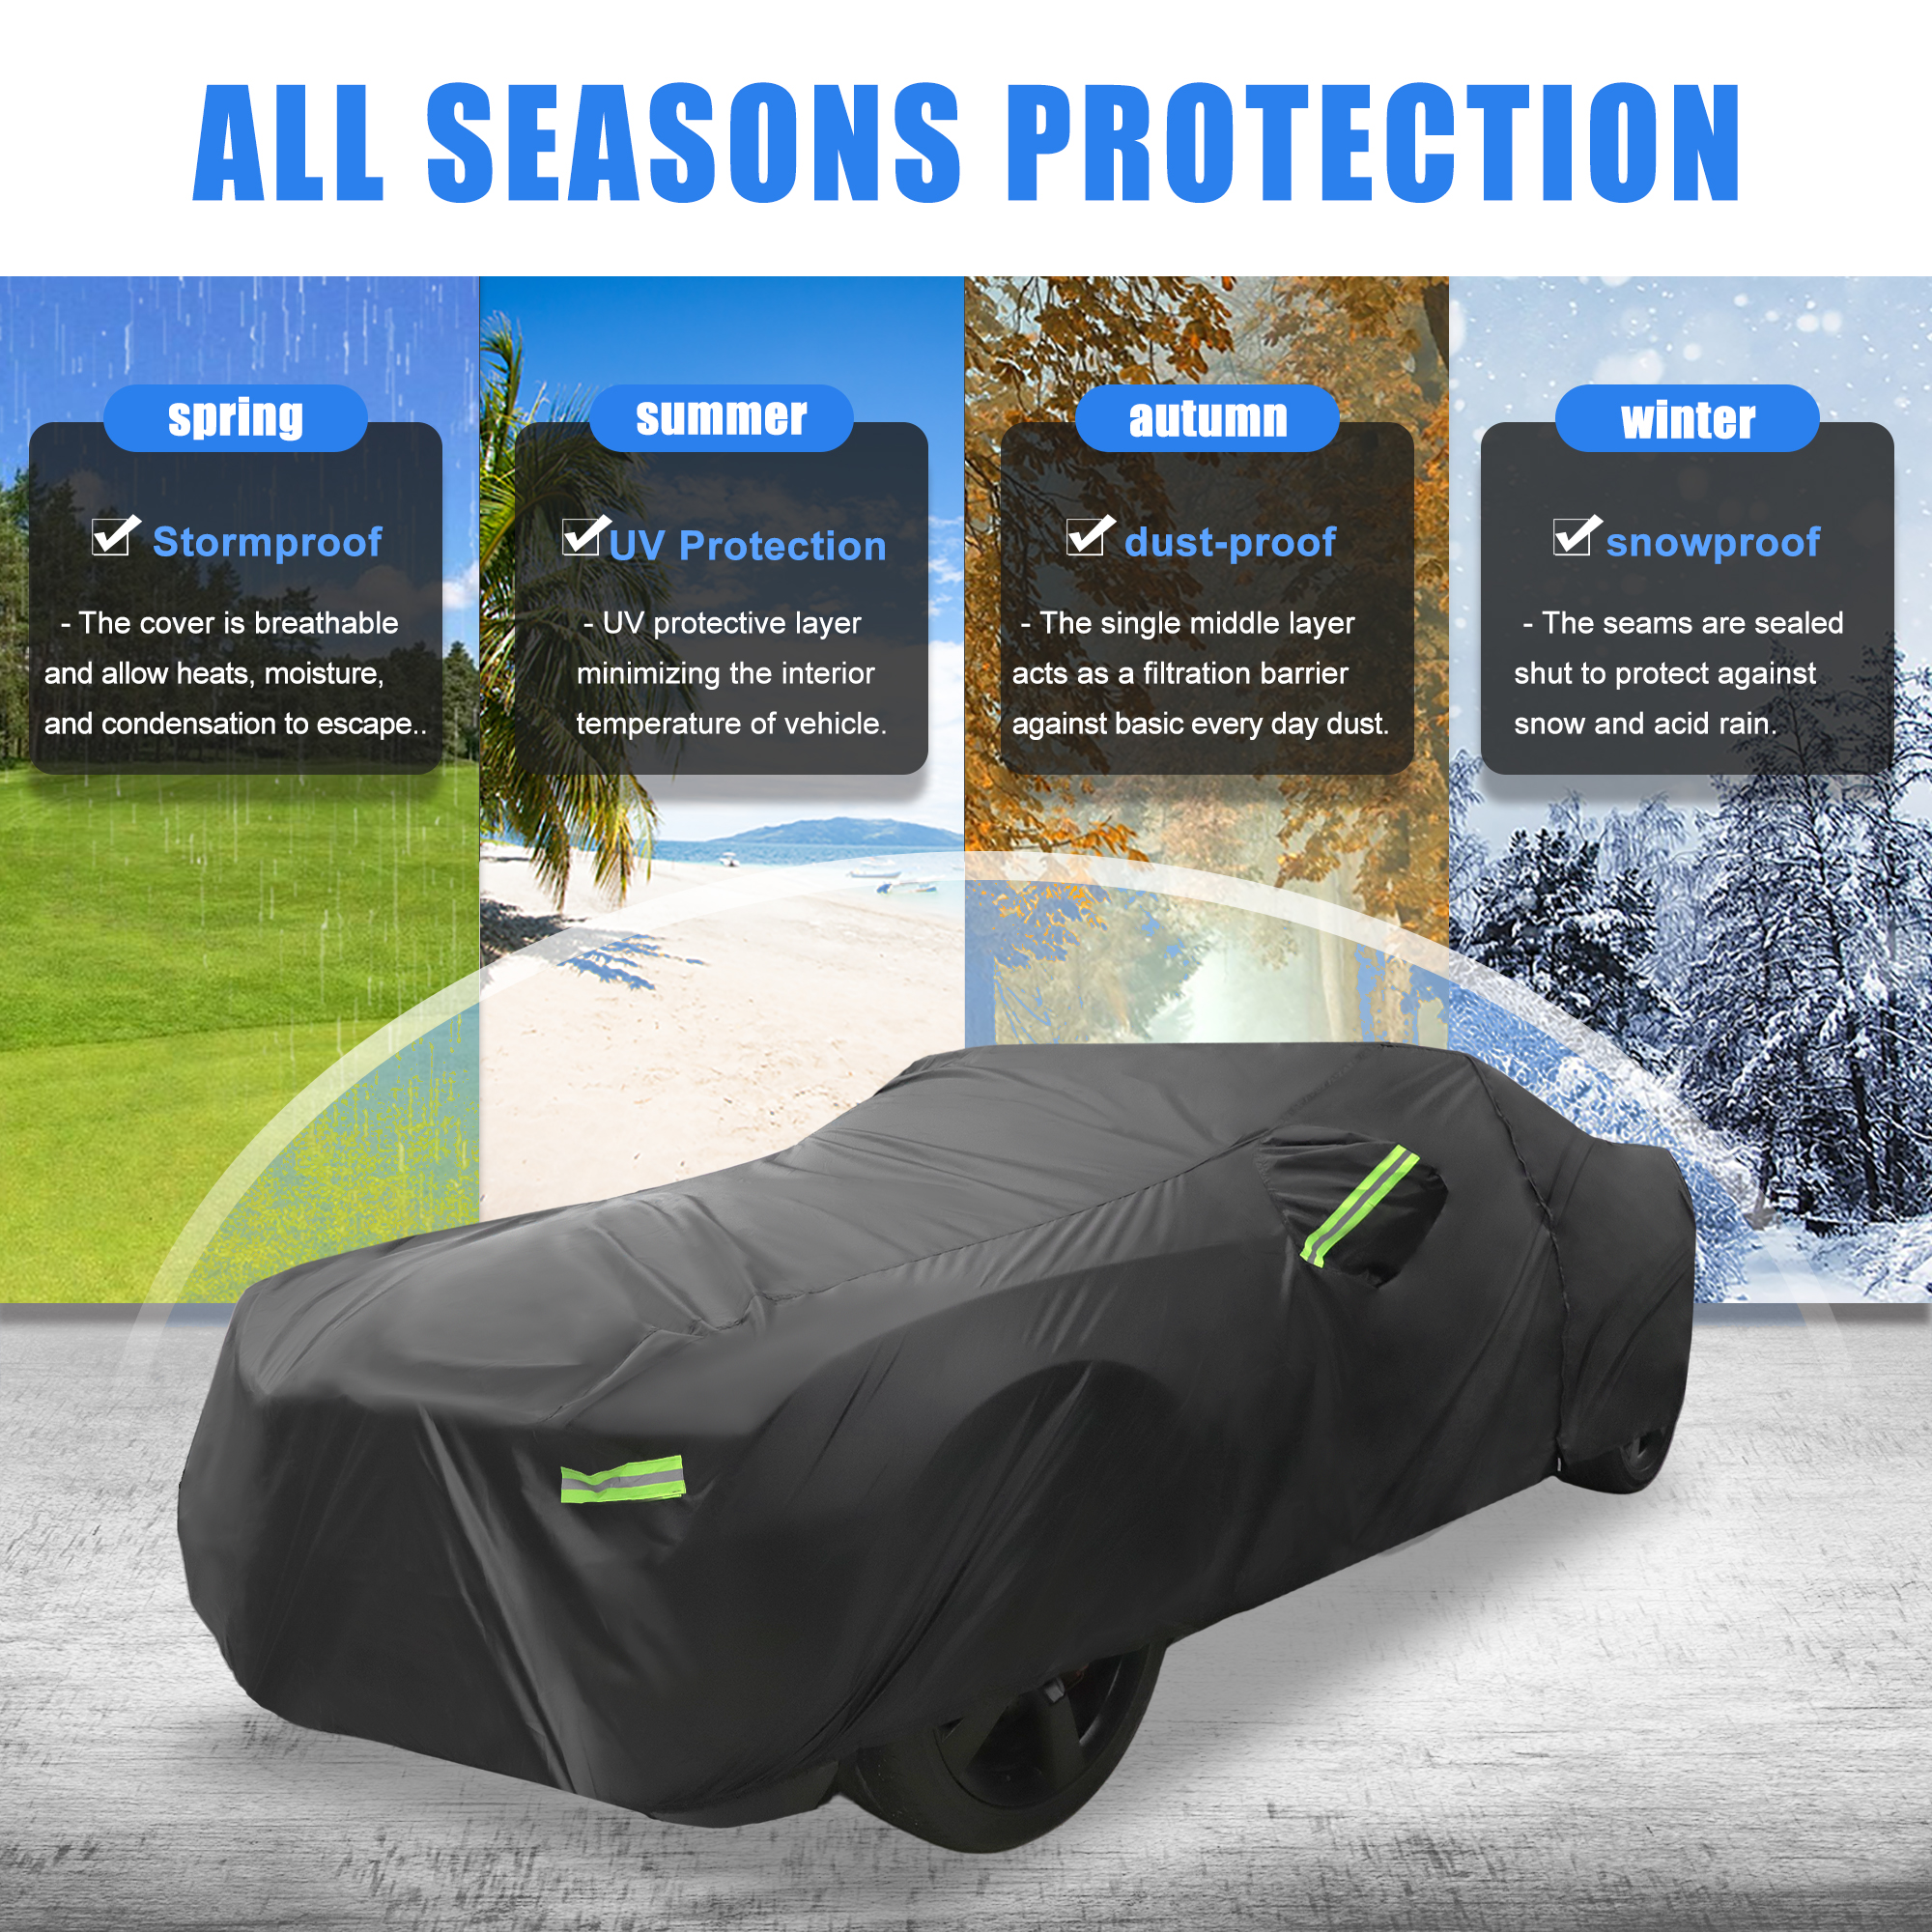 Unique Bargains 1 Pcs Waterproof SUV Car Cover for Chevy Camaro 2010-2021 with Zipper Black